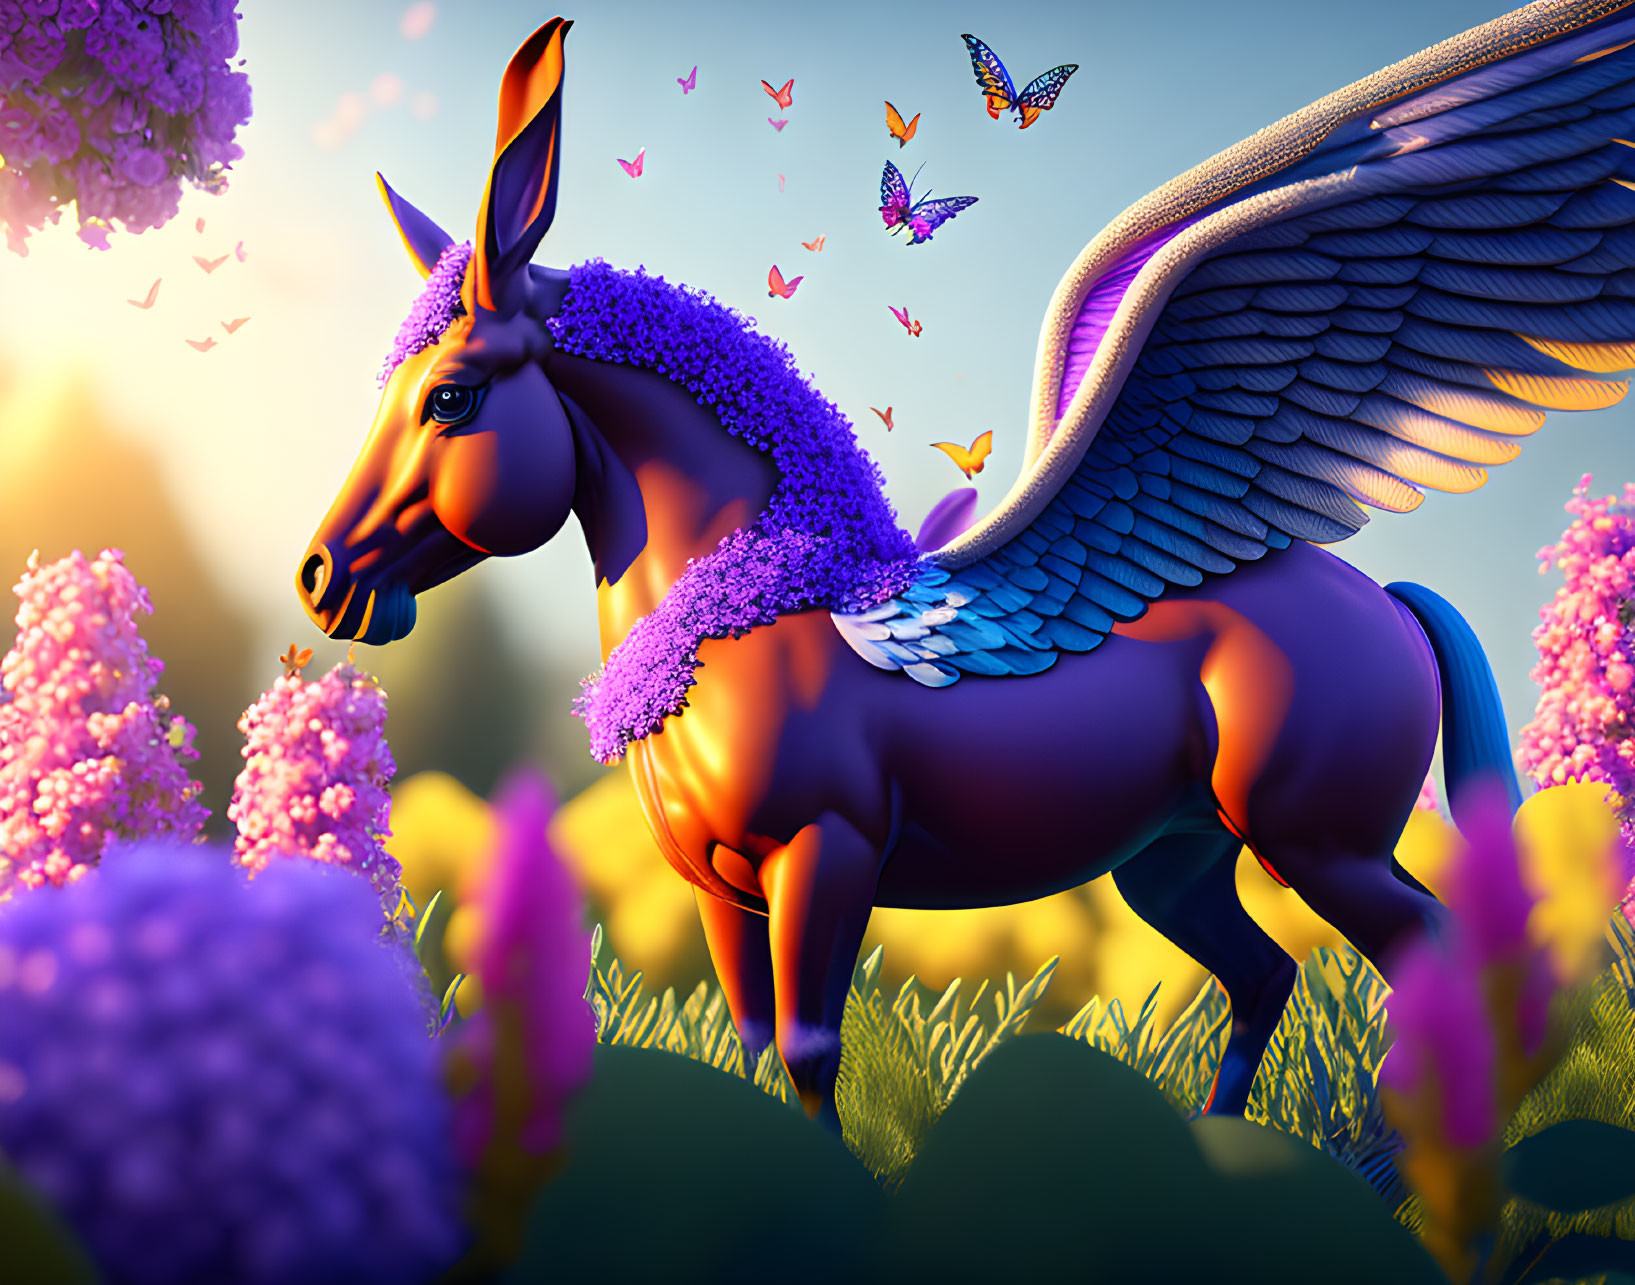 Colorful winged horse with purple mane in floral scene at sunset